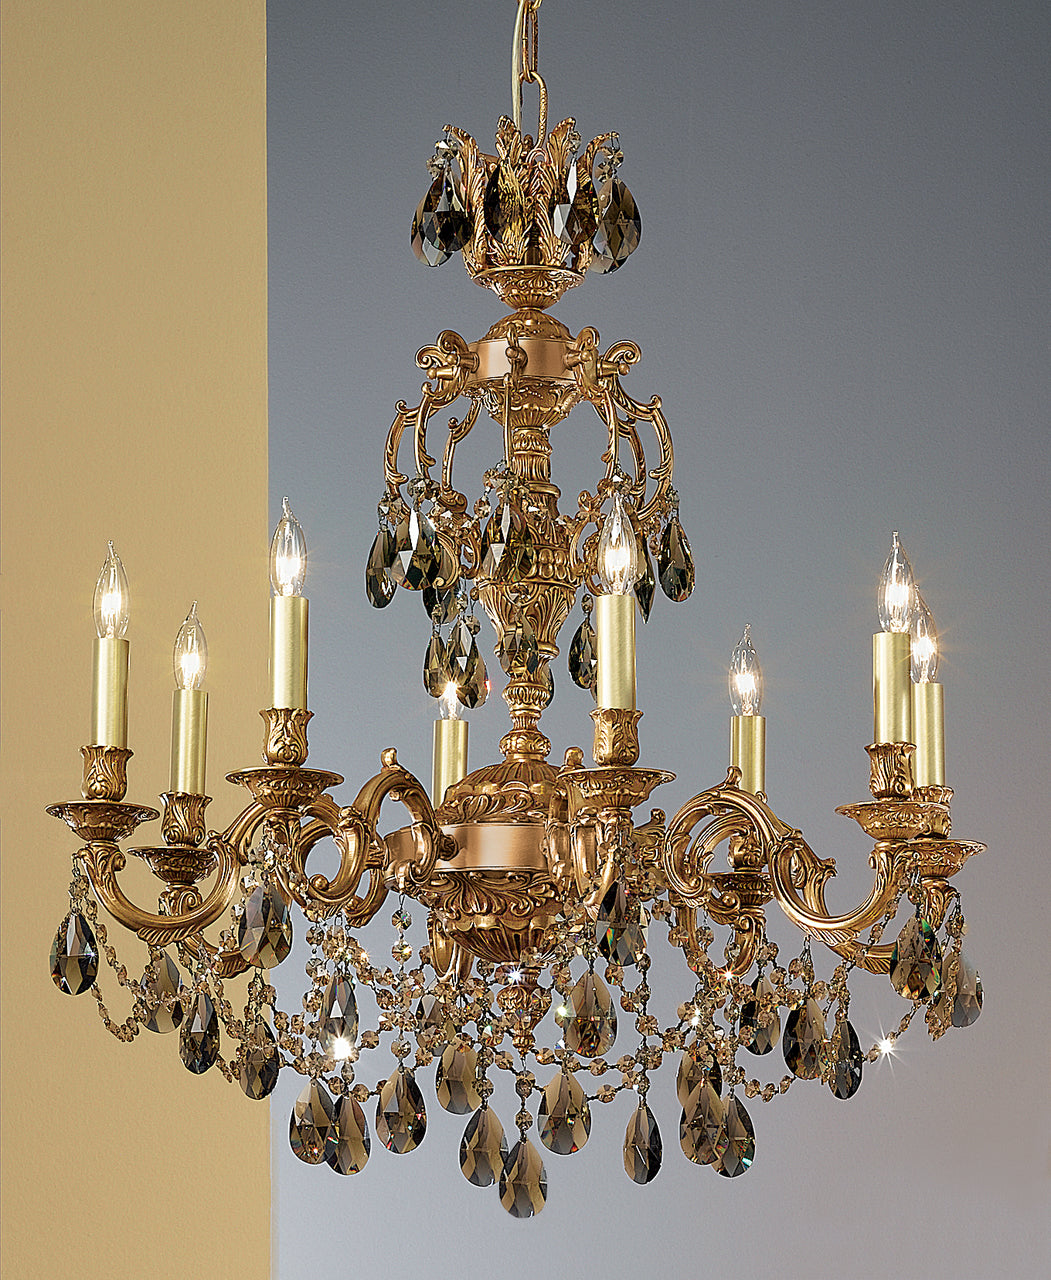 Classic Lighting 57388 FG CGT Chateau Imperial Crystal Chandelier in French Gold (Imported from Spain)